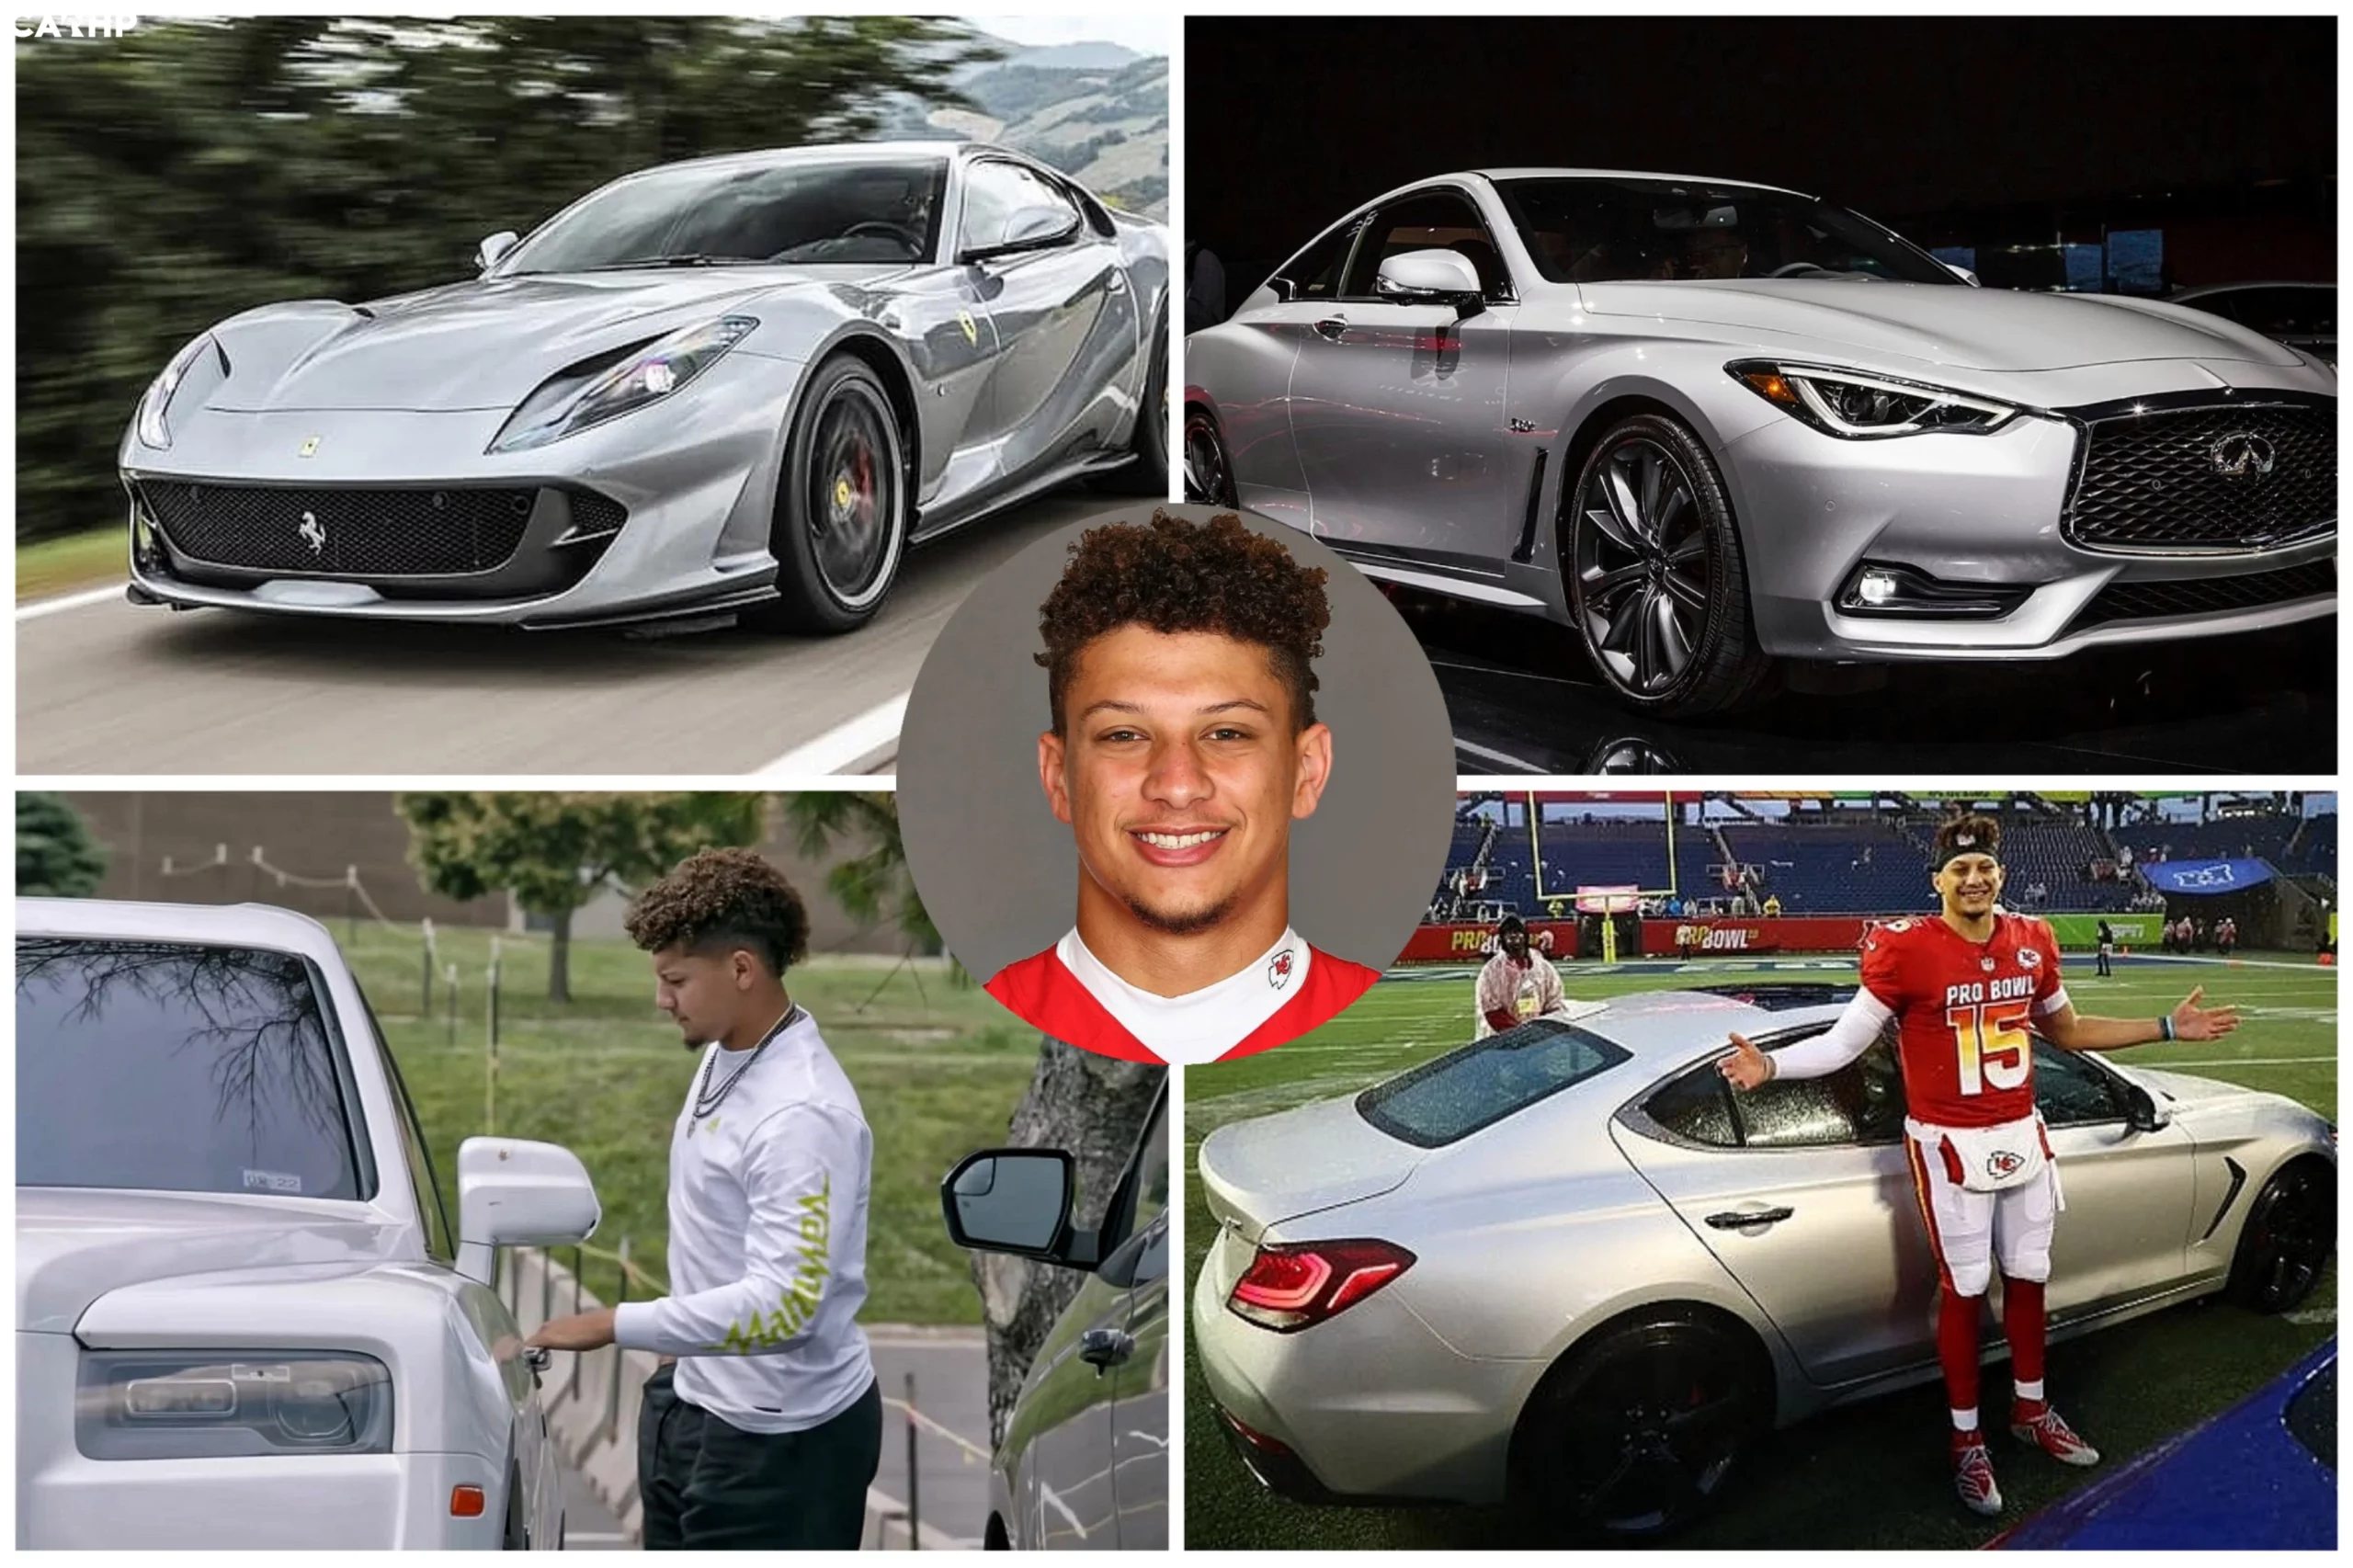 NFL fans are divided over Patrick Mahomes' new vehicle - Mnews